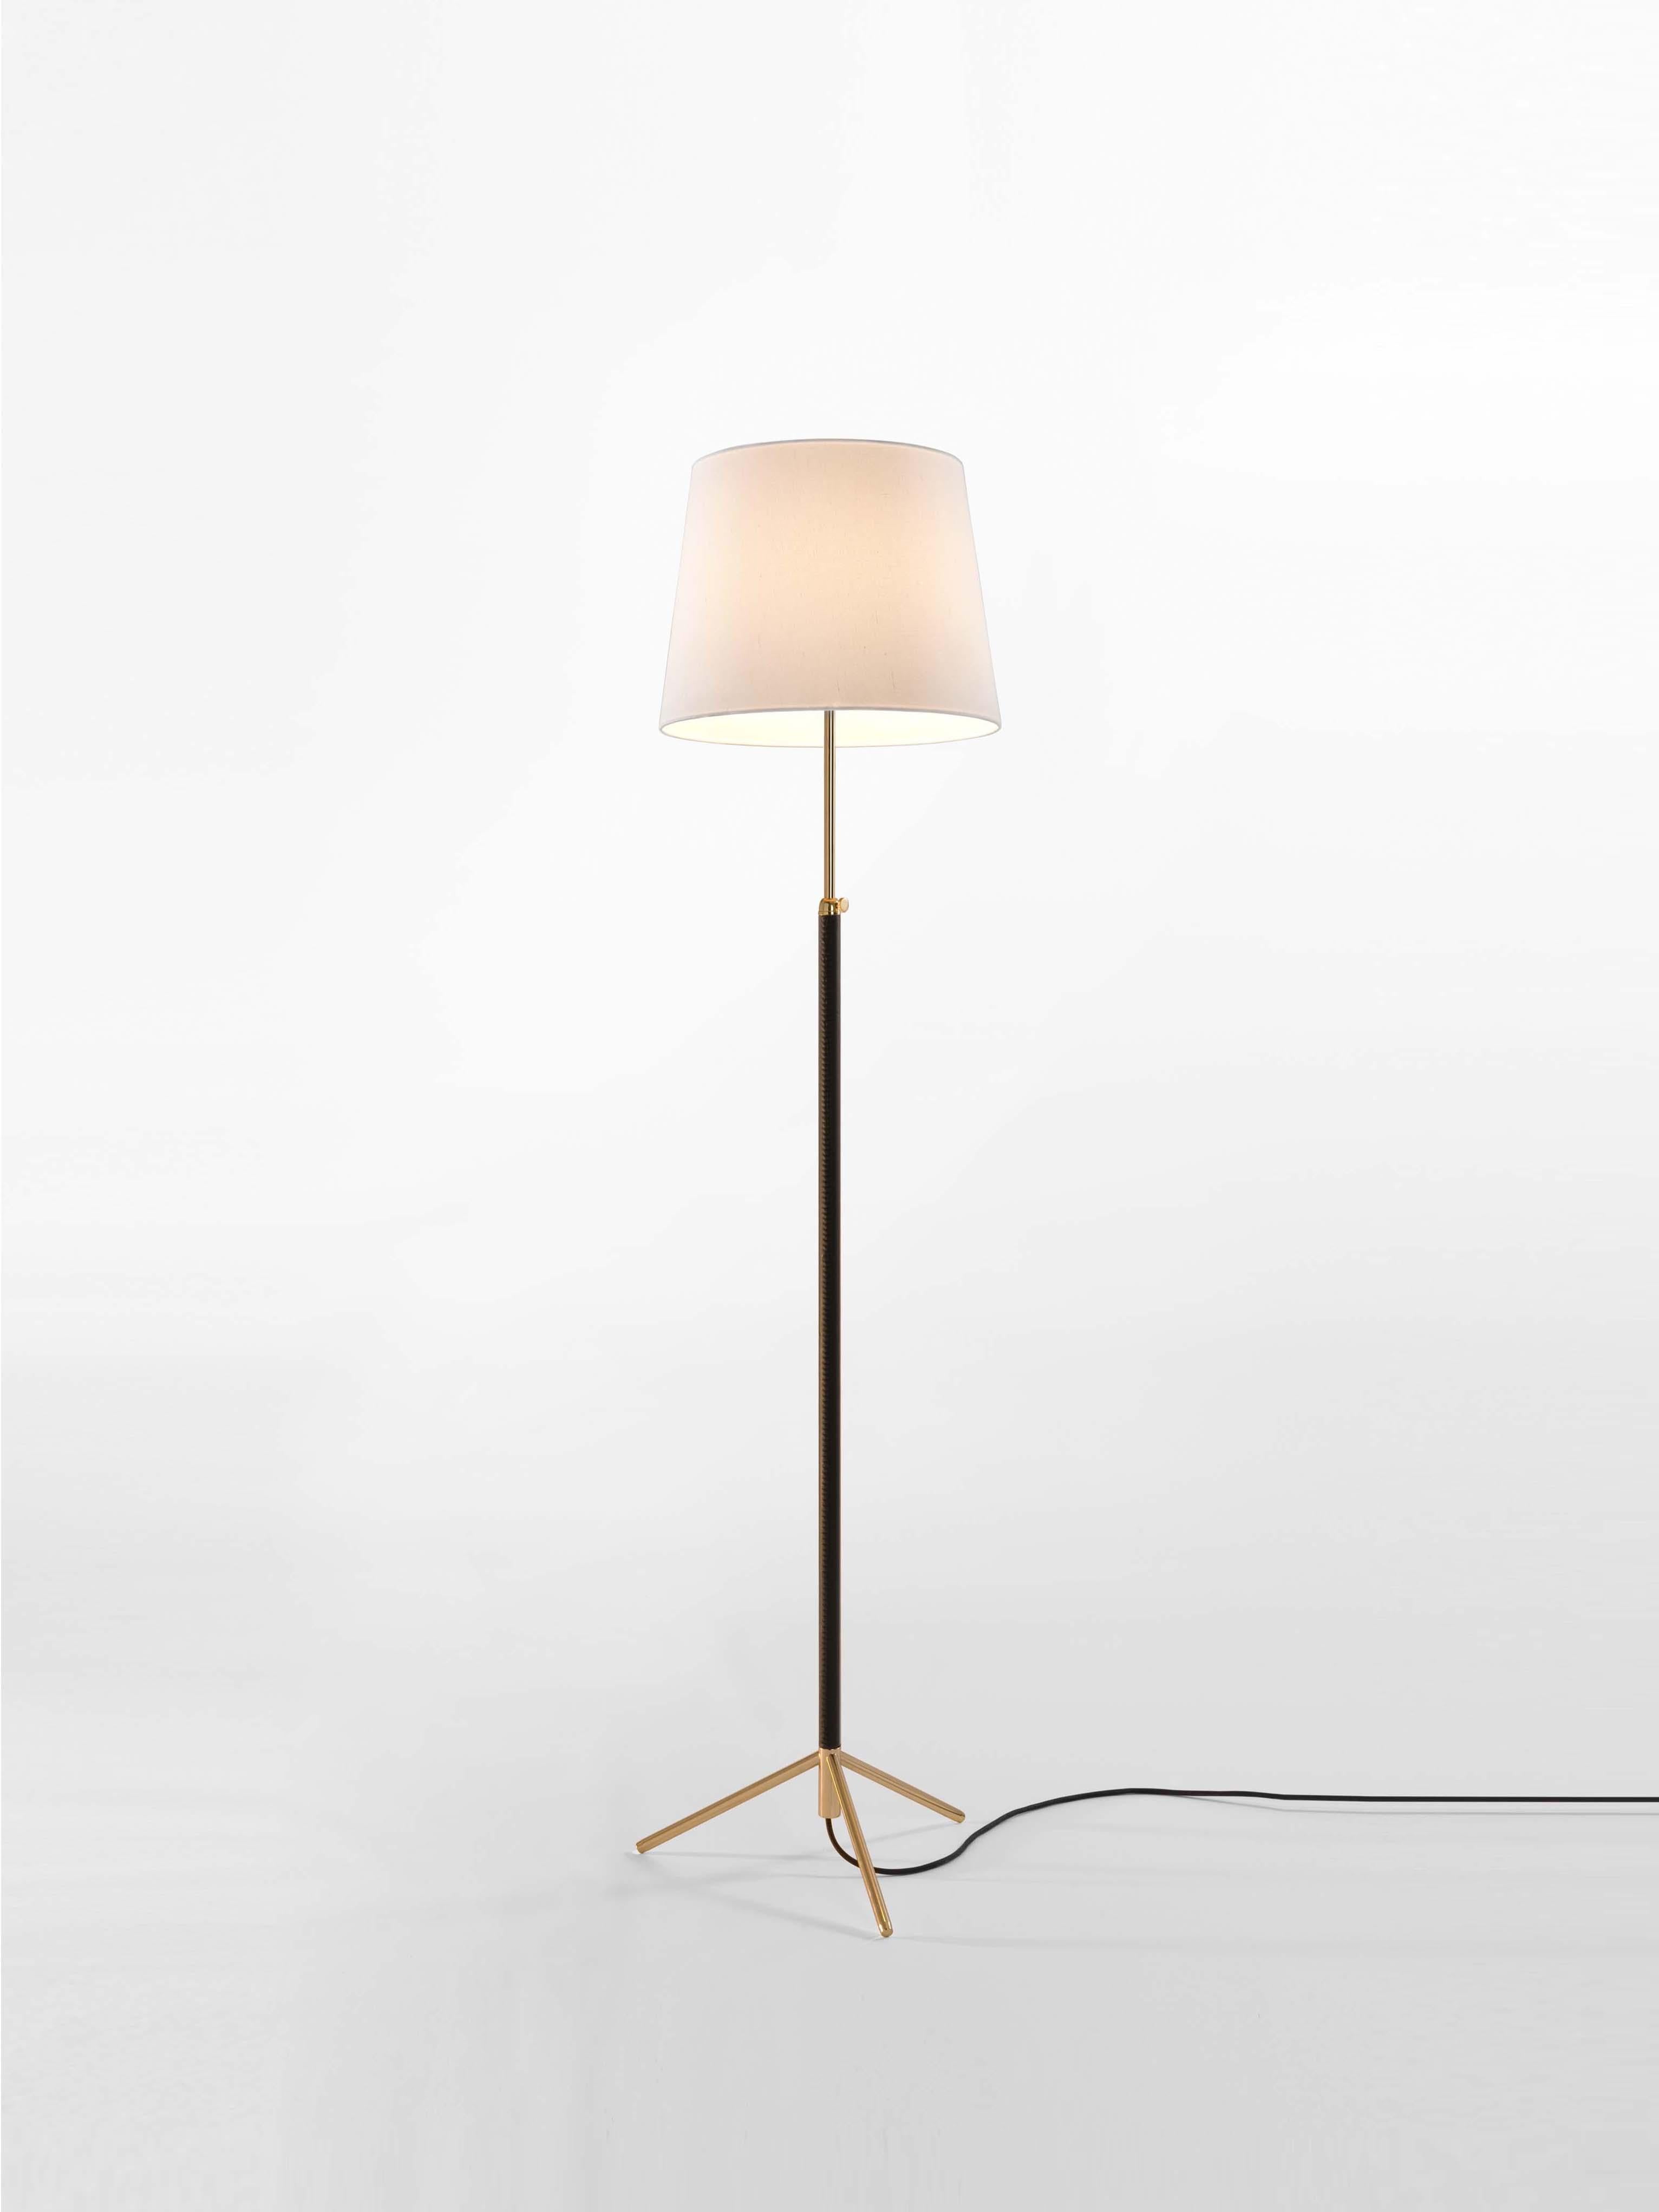 White and brass pie de Salón G3 floor lamp by Jaume Sans
Dimensions: D 40 x H 120-160 cm
Materials: Metal, leather, linen.
Available in chrome-plated or polished brass structure.
Available in other shade colors and sizes.

This slender